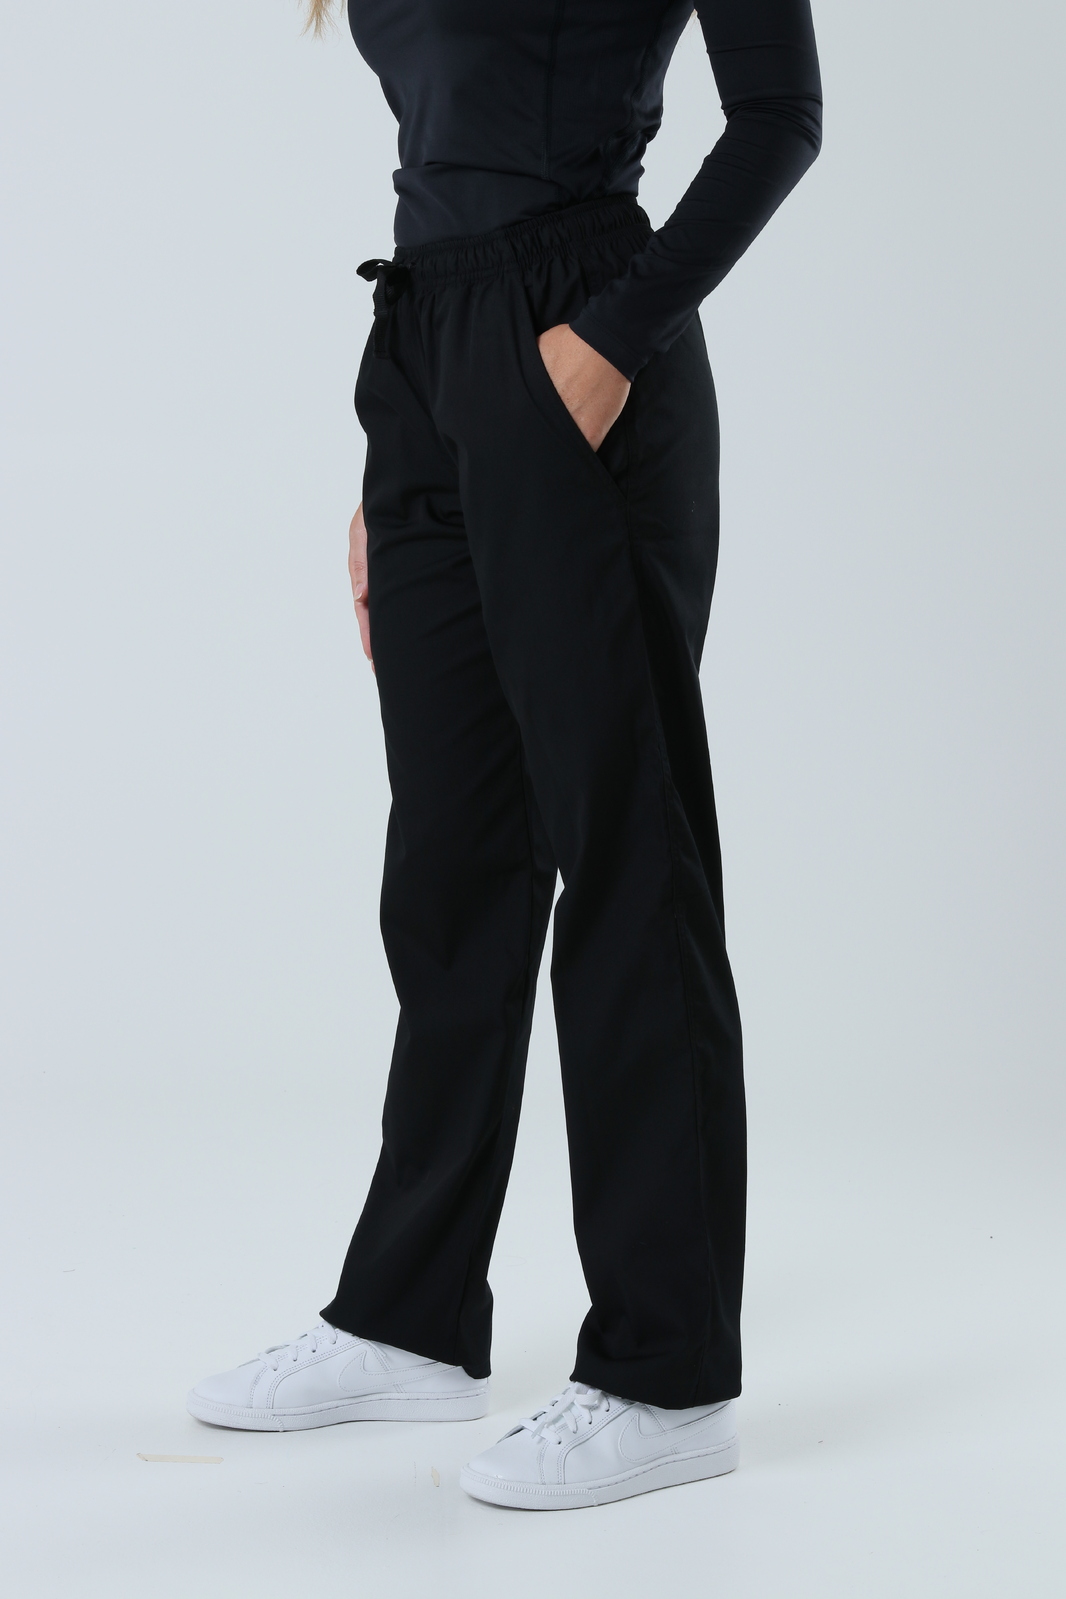 Redland Hospital - ED Doctor (Women's Fit Solid Scrub Top and Regular Pants in Black incl Logos)